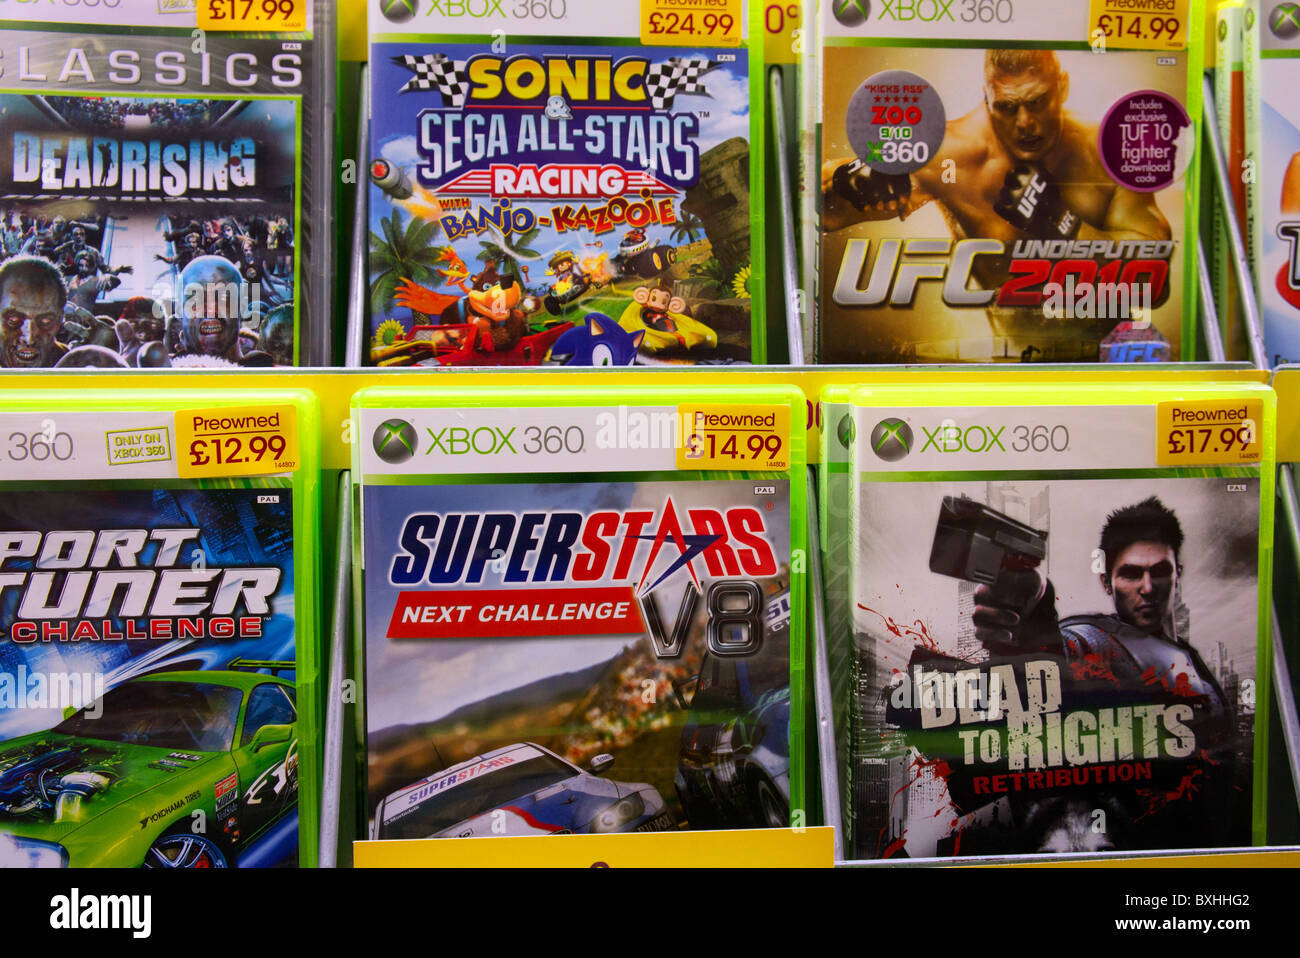 pre-owned " XBOX games on sale in a Game shop, UK Stock Photo - Alamy